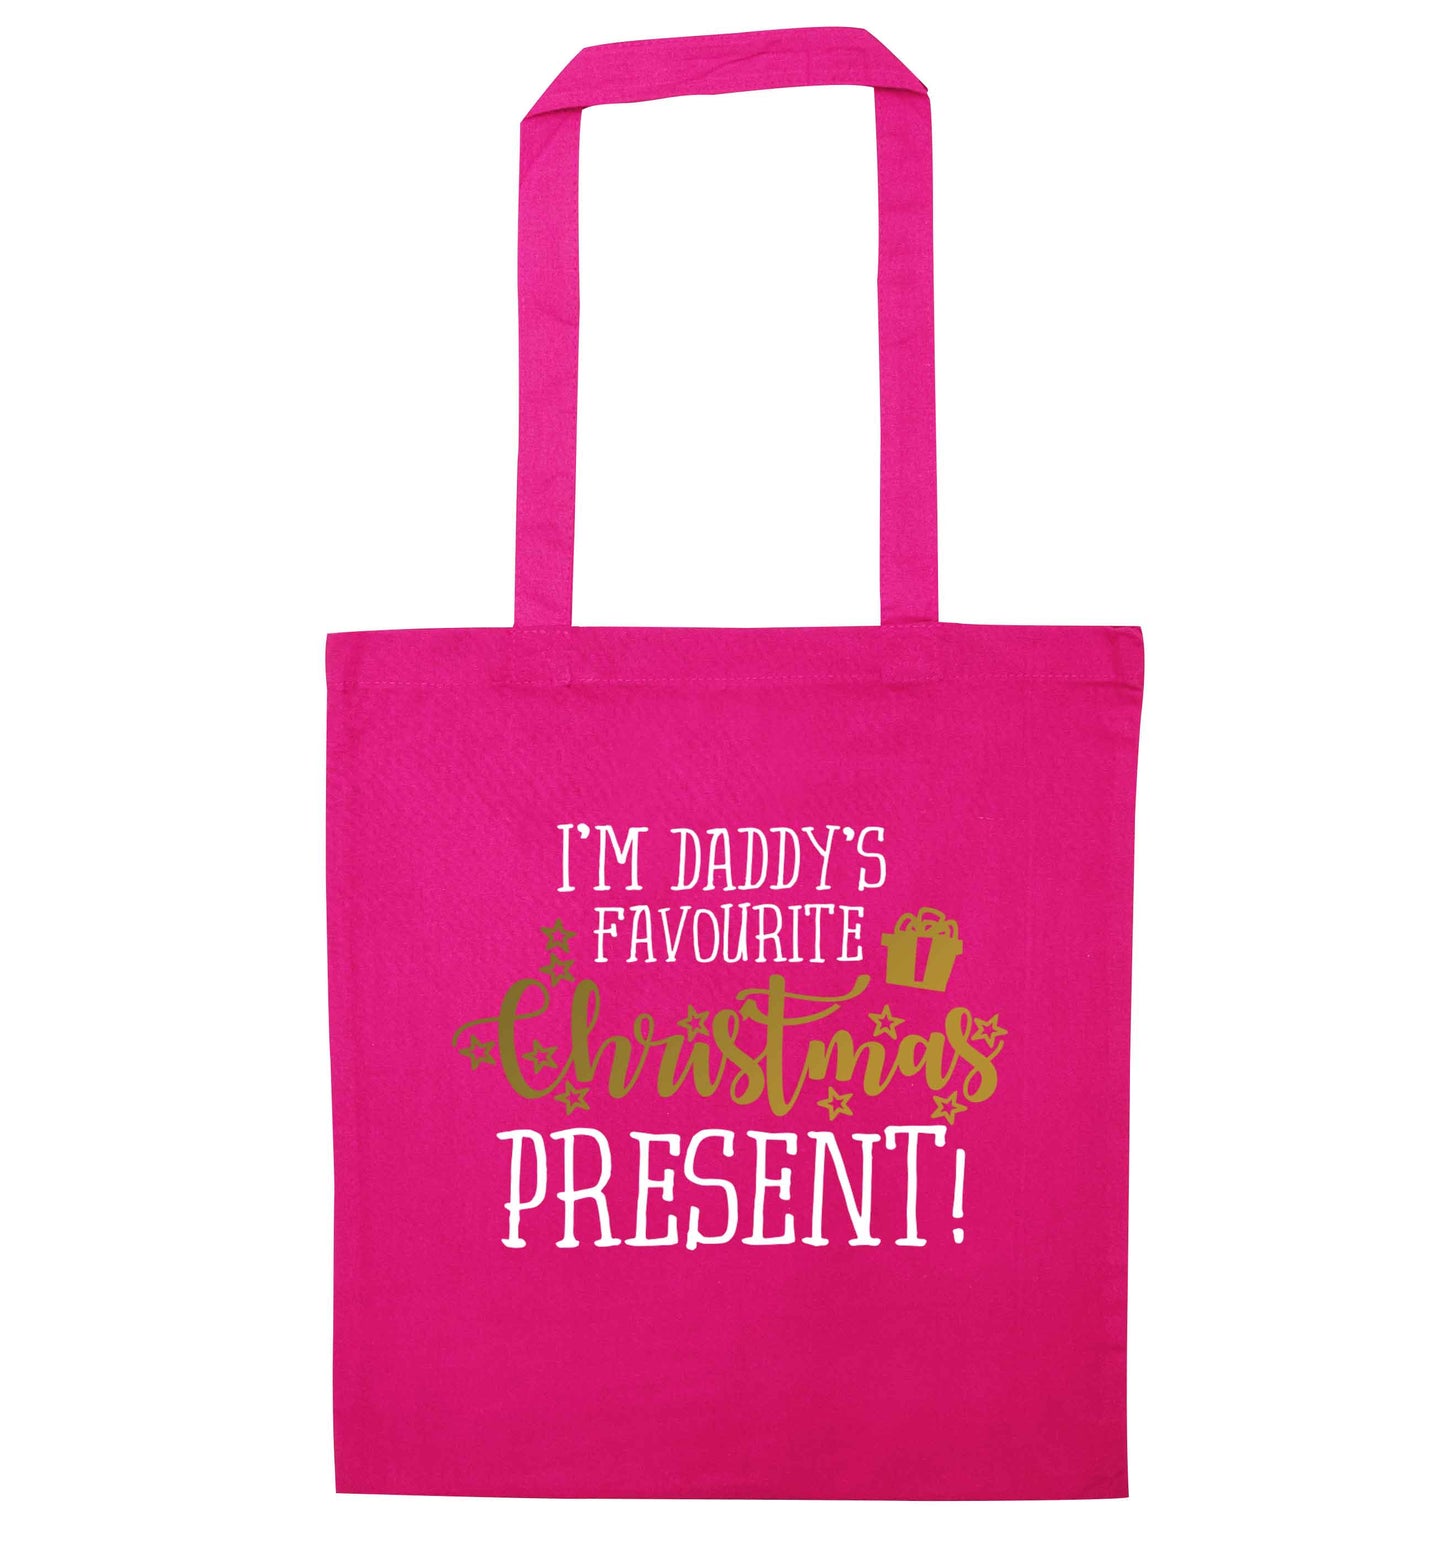 Daddy's favourite Christmas present pink tote bag